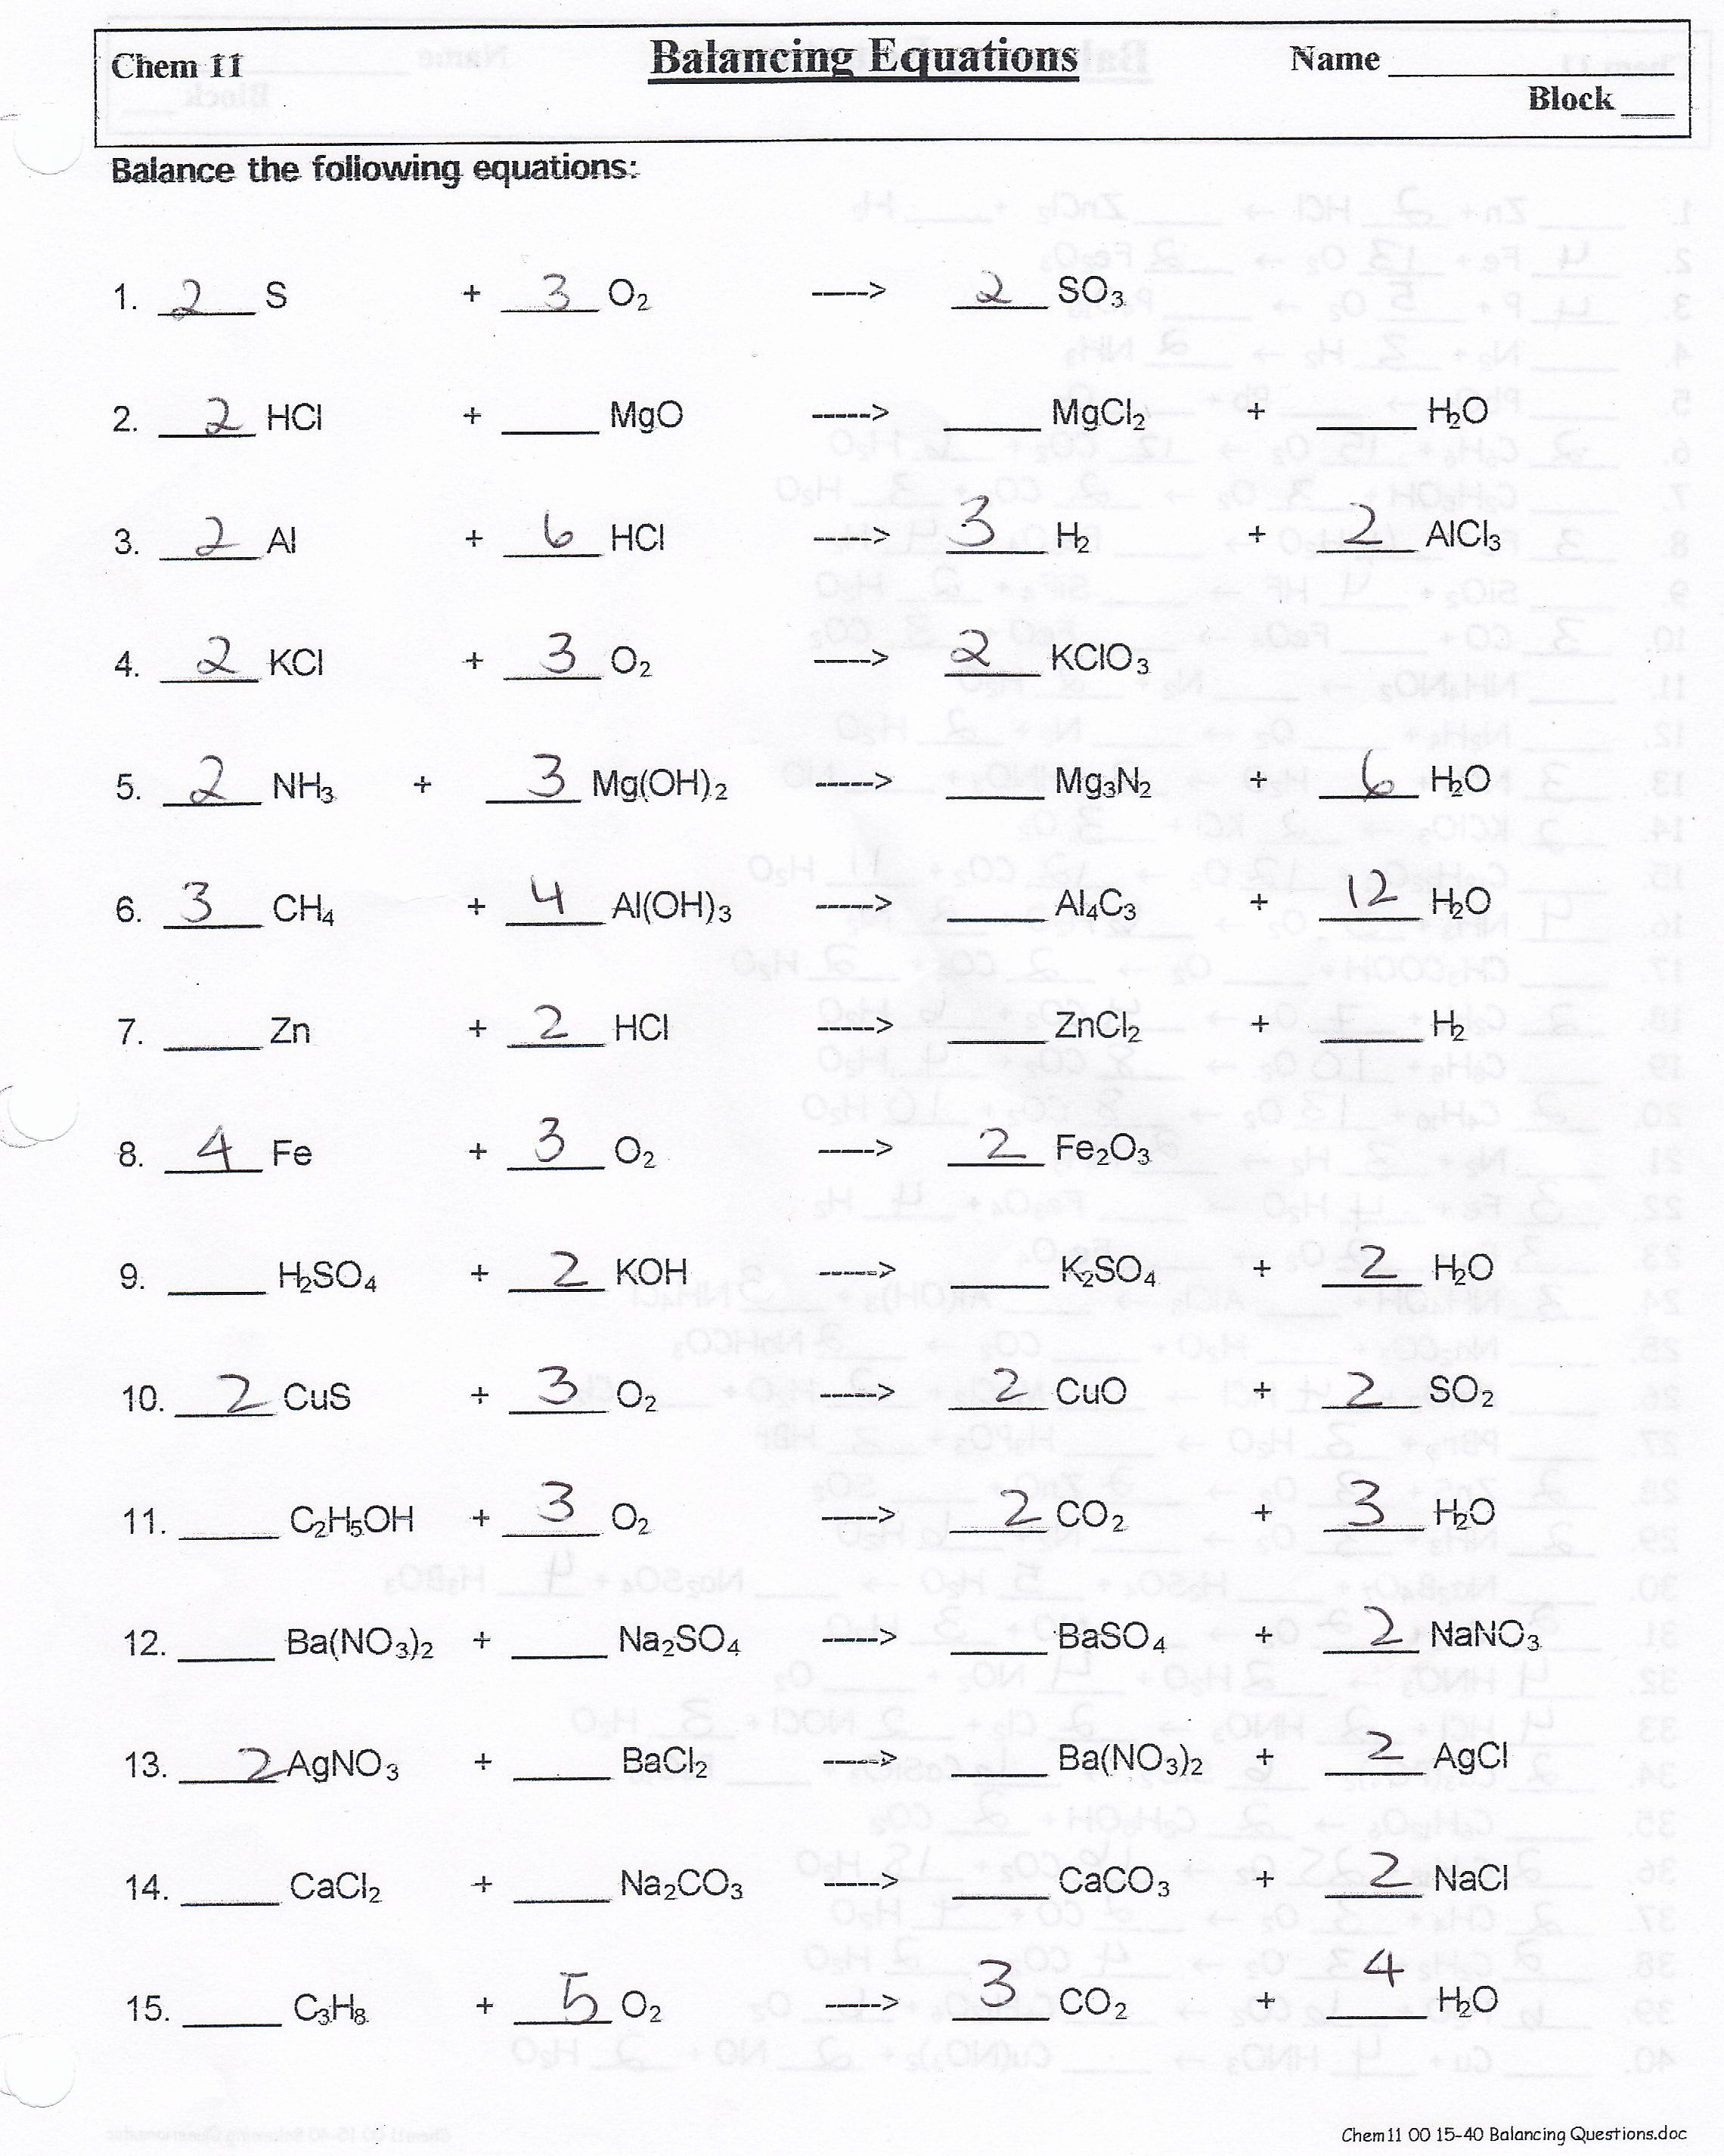 Balancing Equations Worksheet Answers Unique Balancing Equations Worksheet Health and Fitness Training